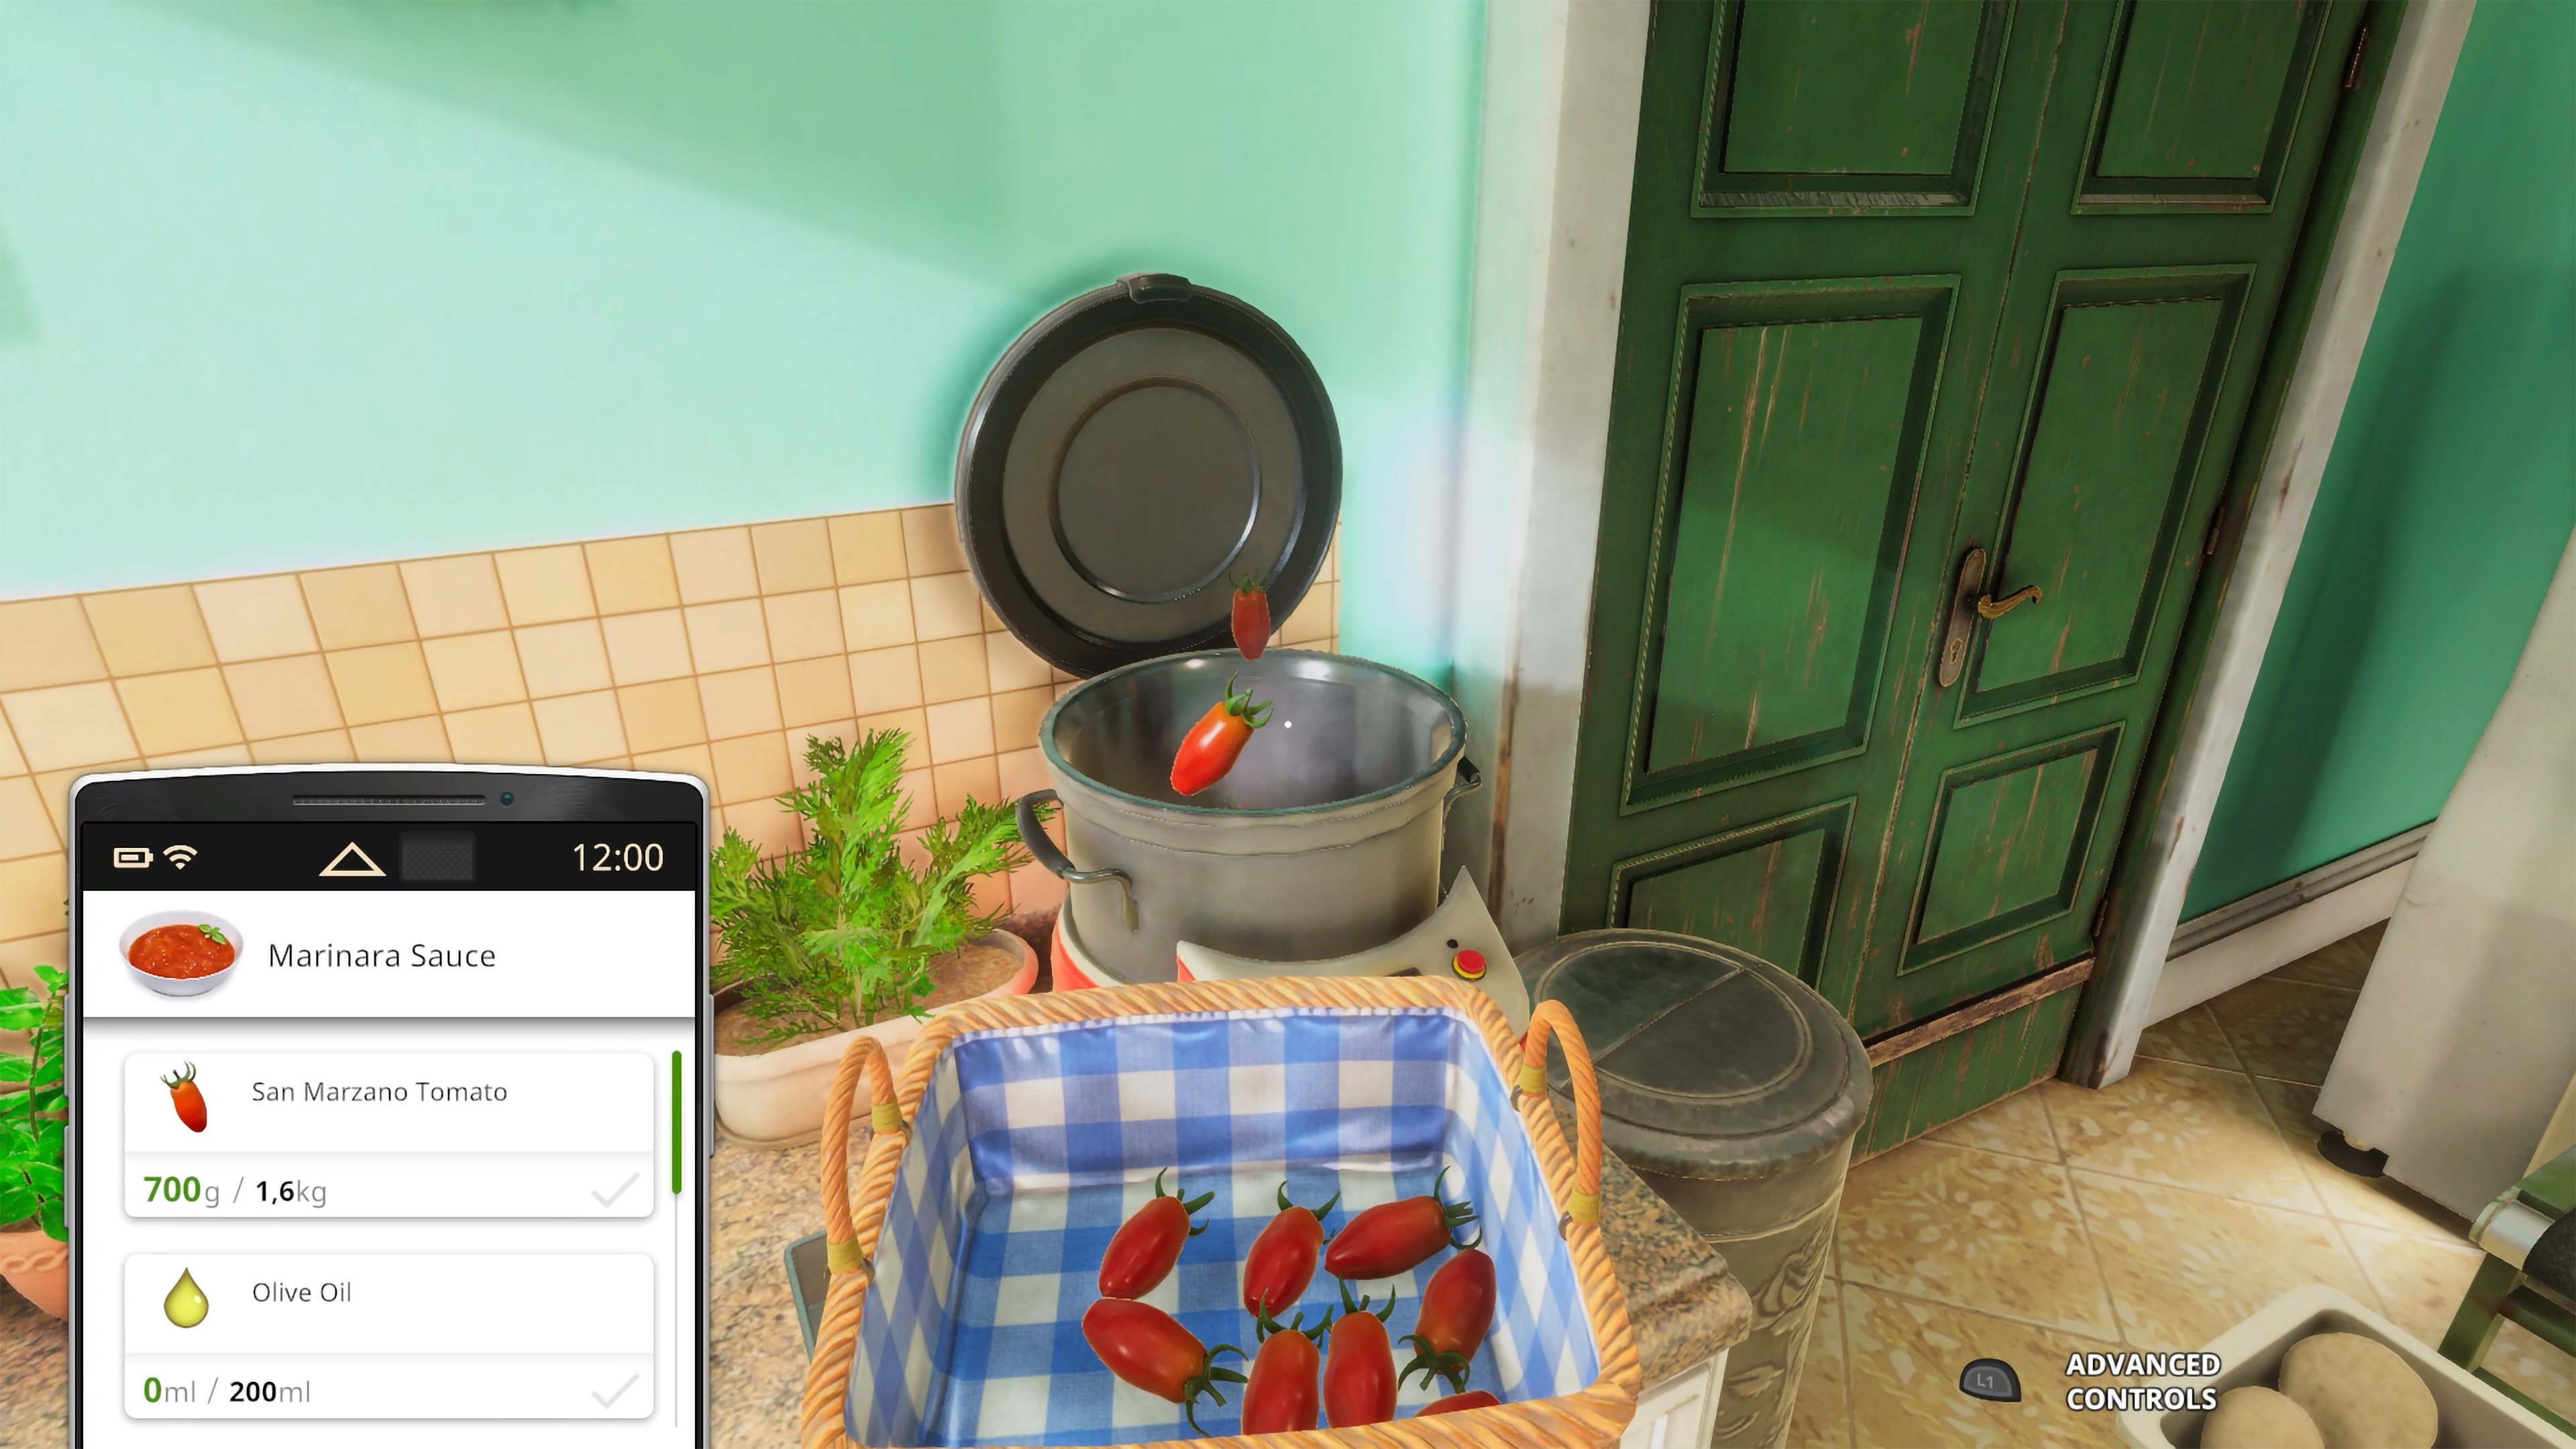 Cooking Simulator — Pizza on Switch — price history, screenshots